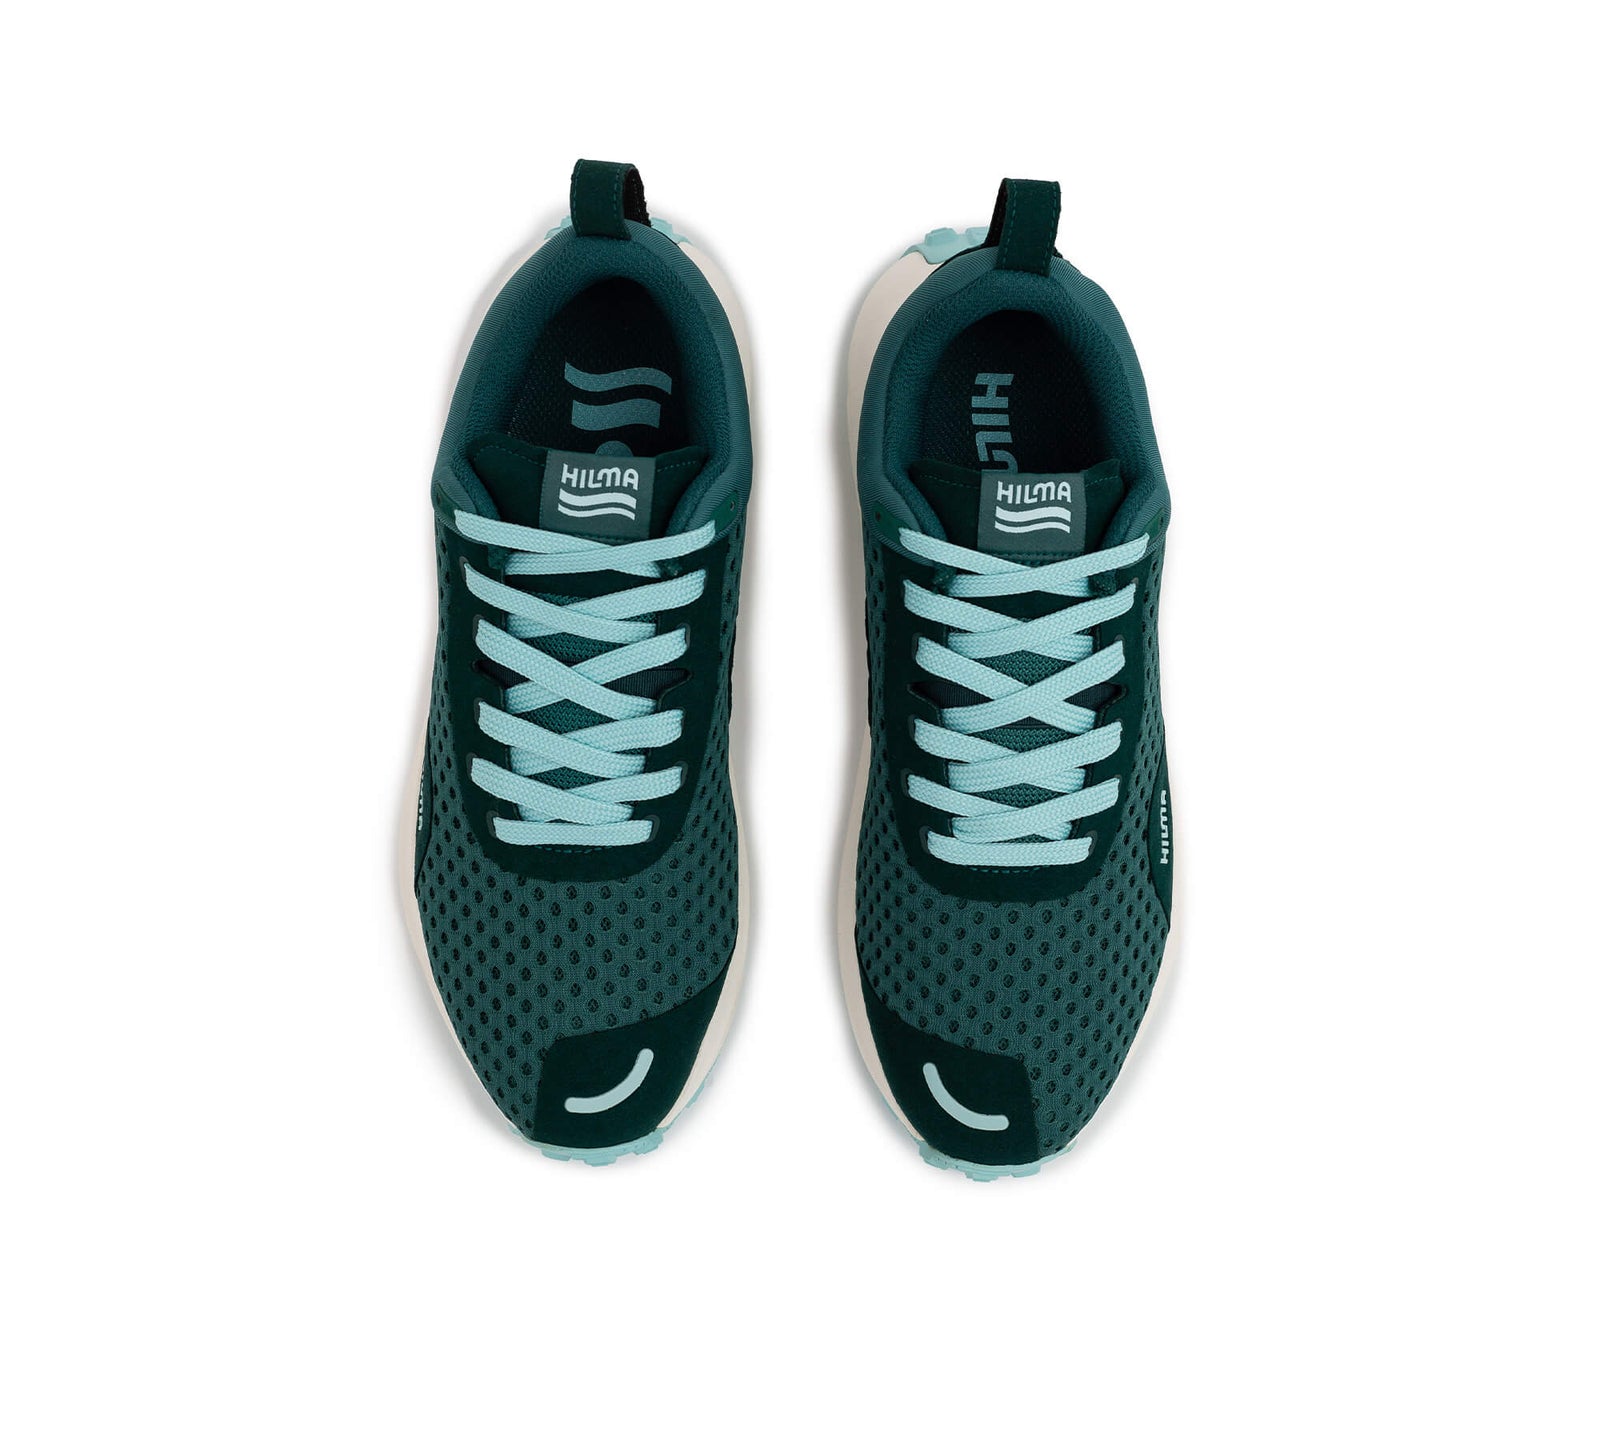 Top down view of a pair of the Everywhere Hilma Running shoe in Evergreen